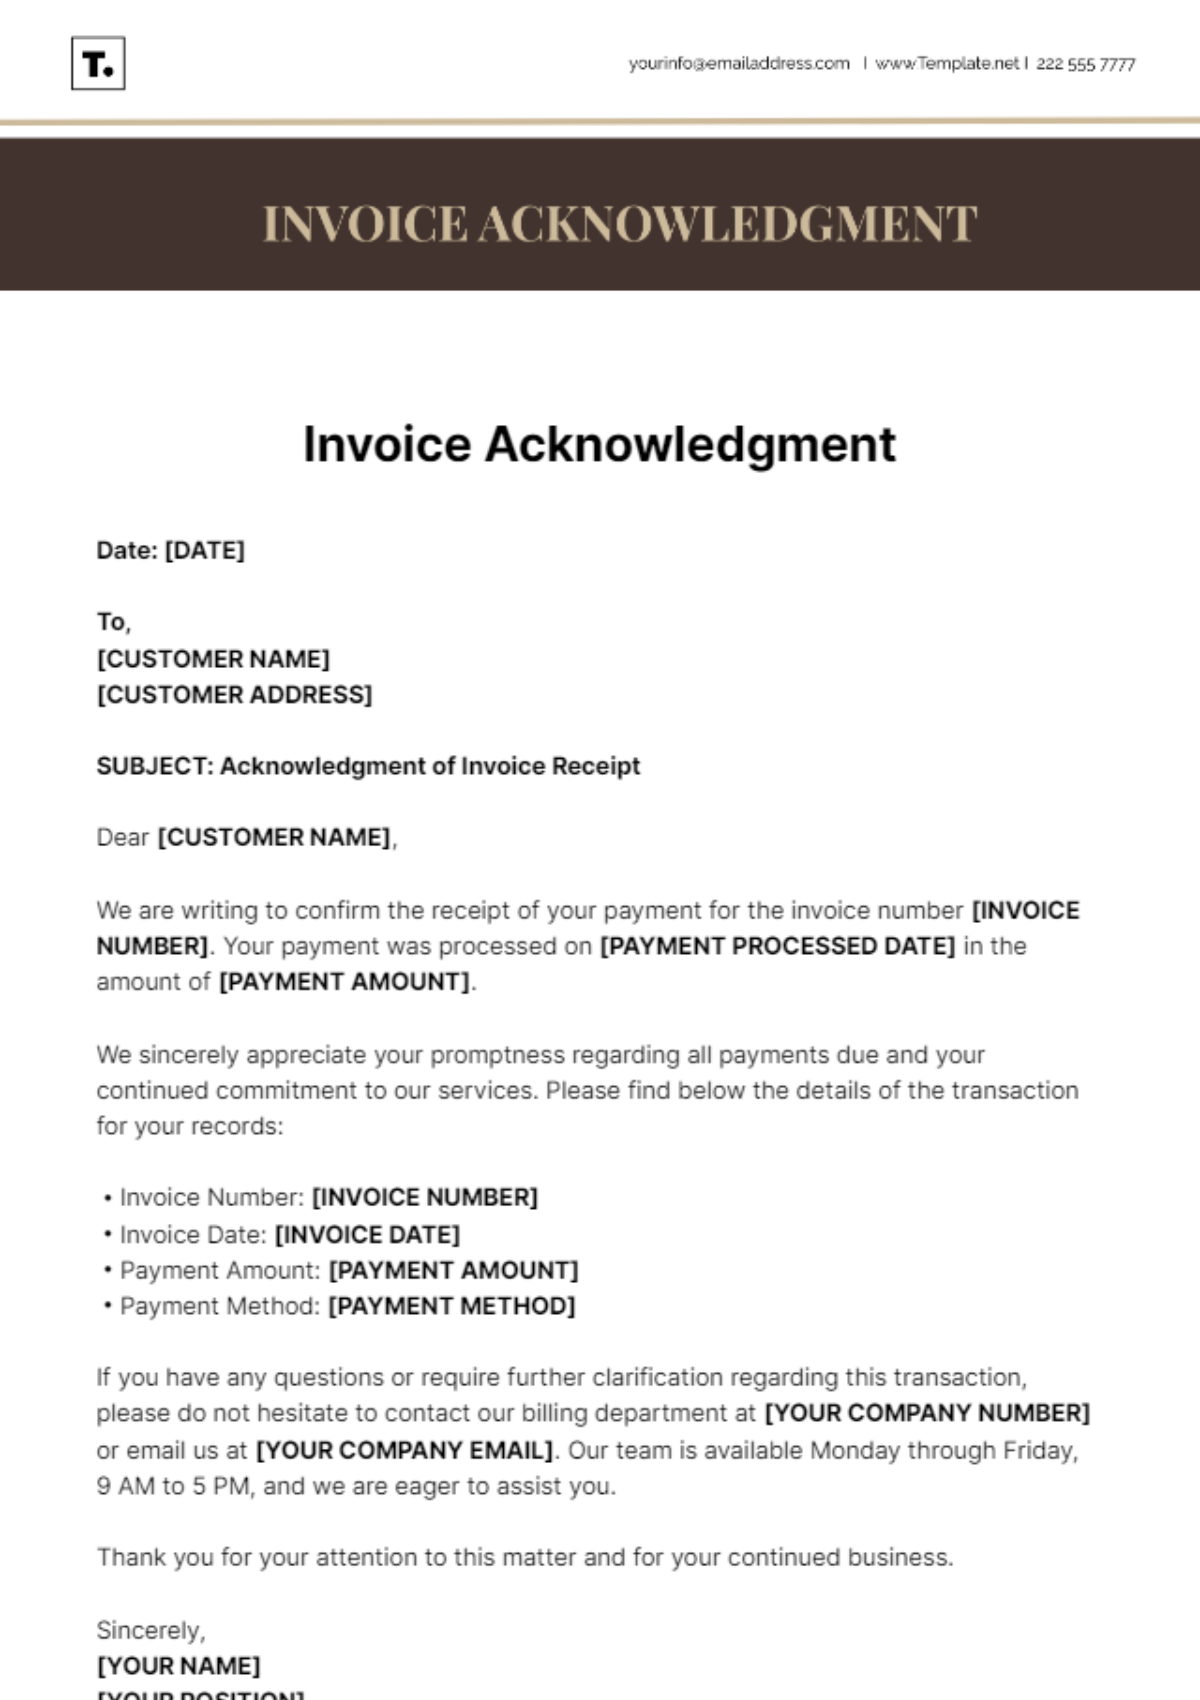 Invoice Acknowledgment Template